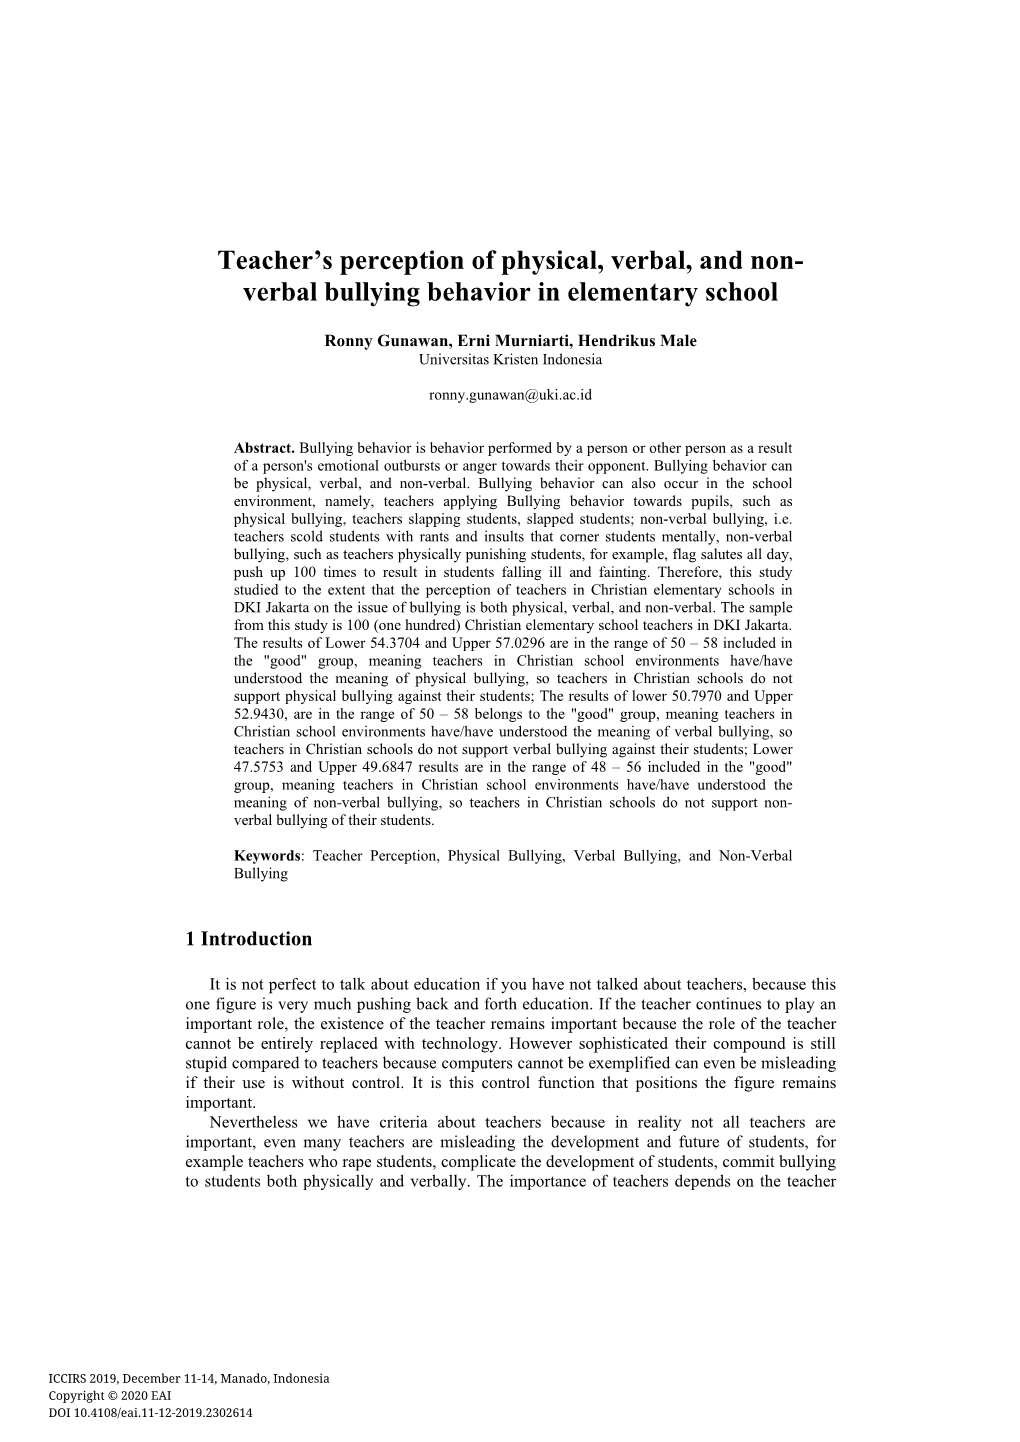 Teacher's Perception of Physical, Verbal, And